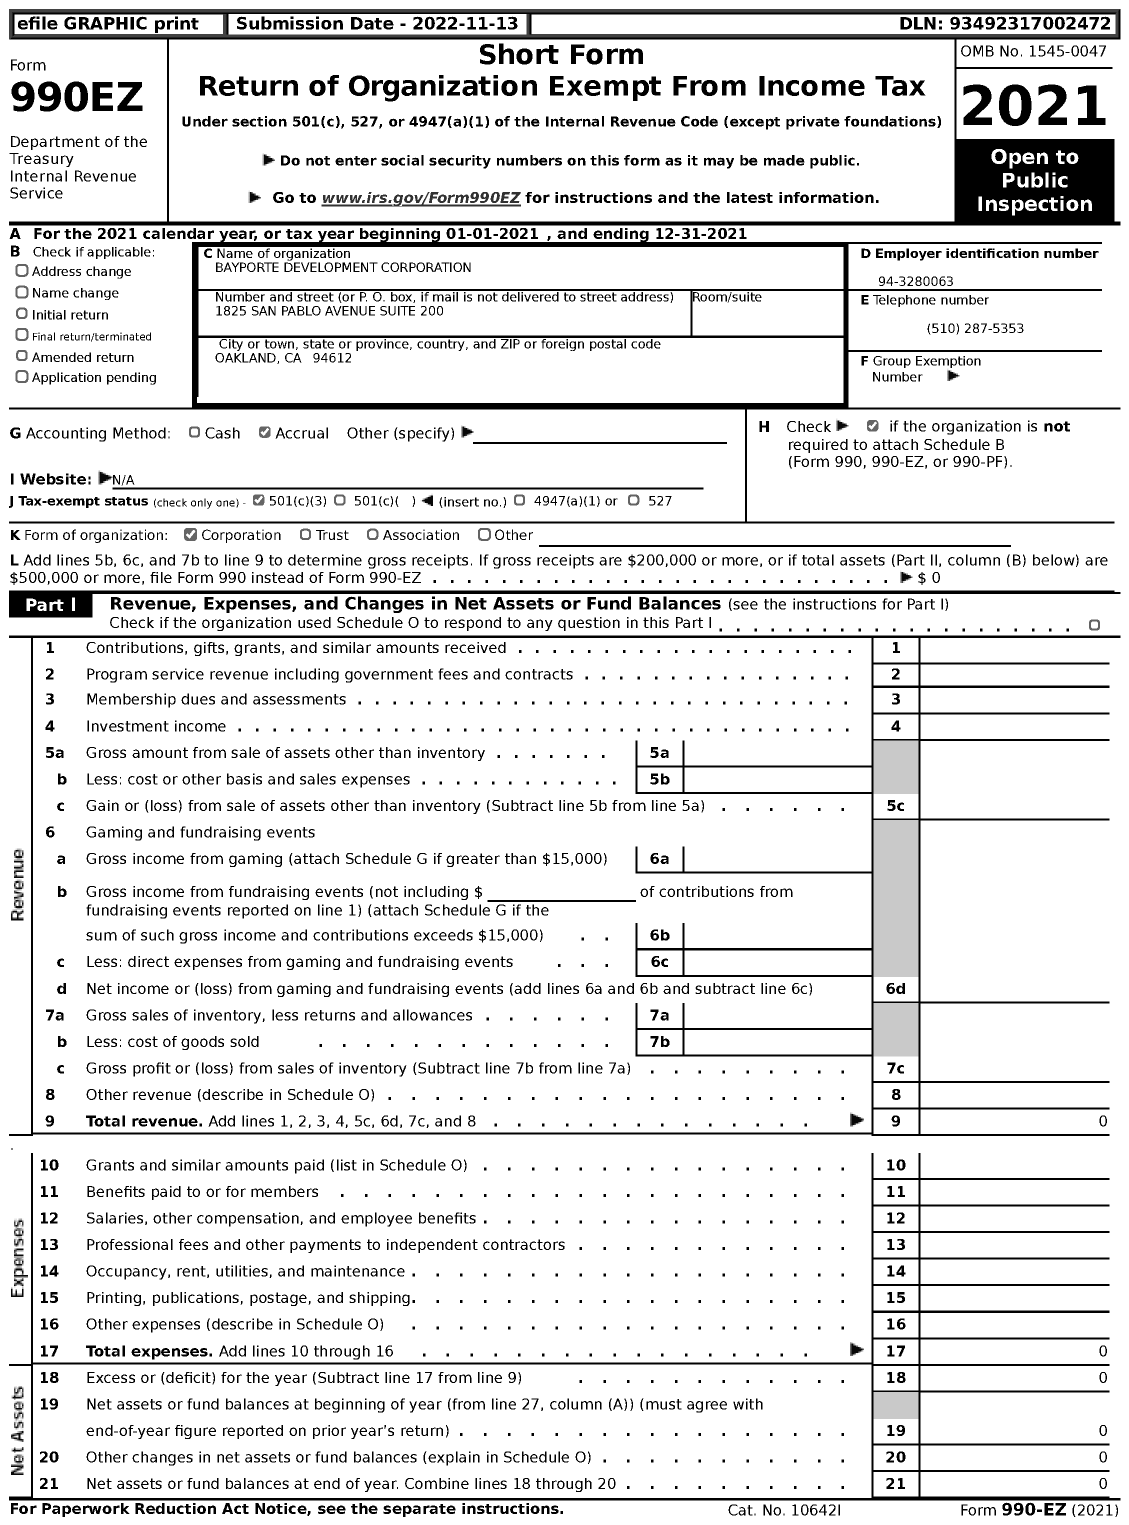 Image of first page of 2021 Form 990EZ for Bayporte Development Corporation